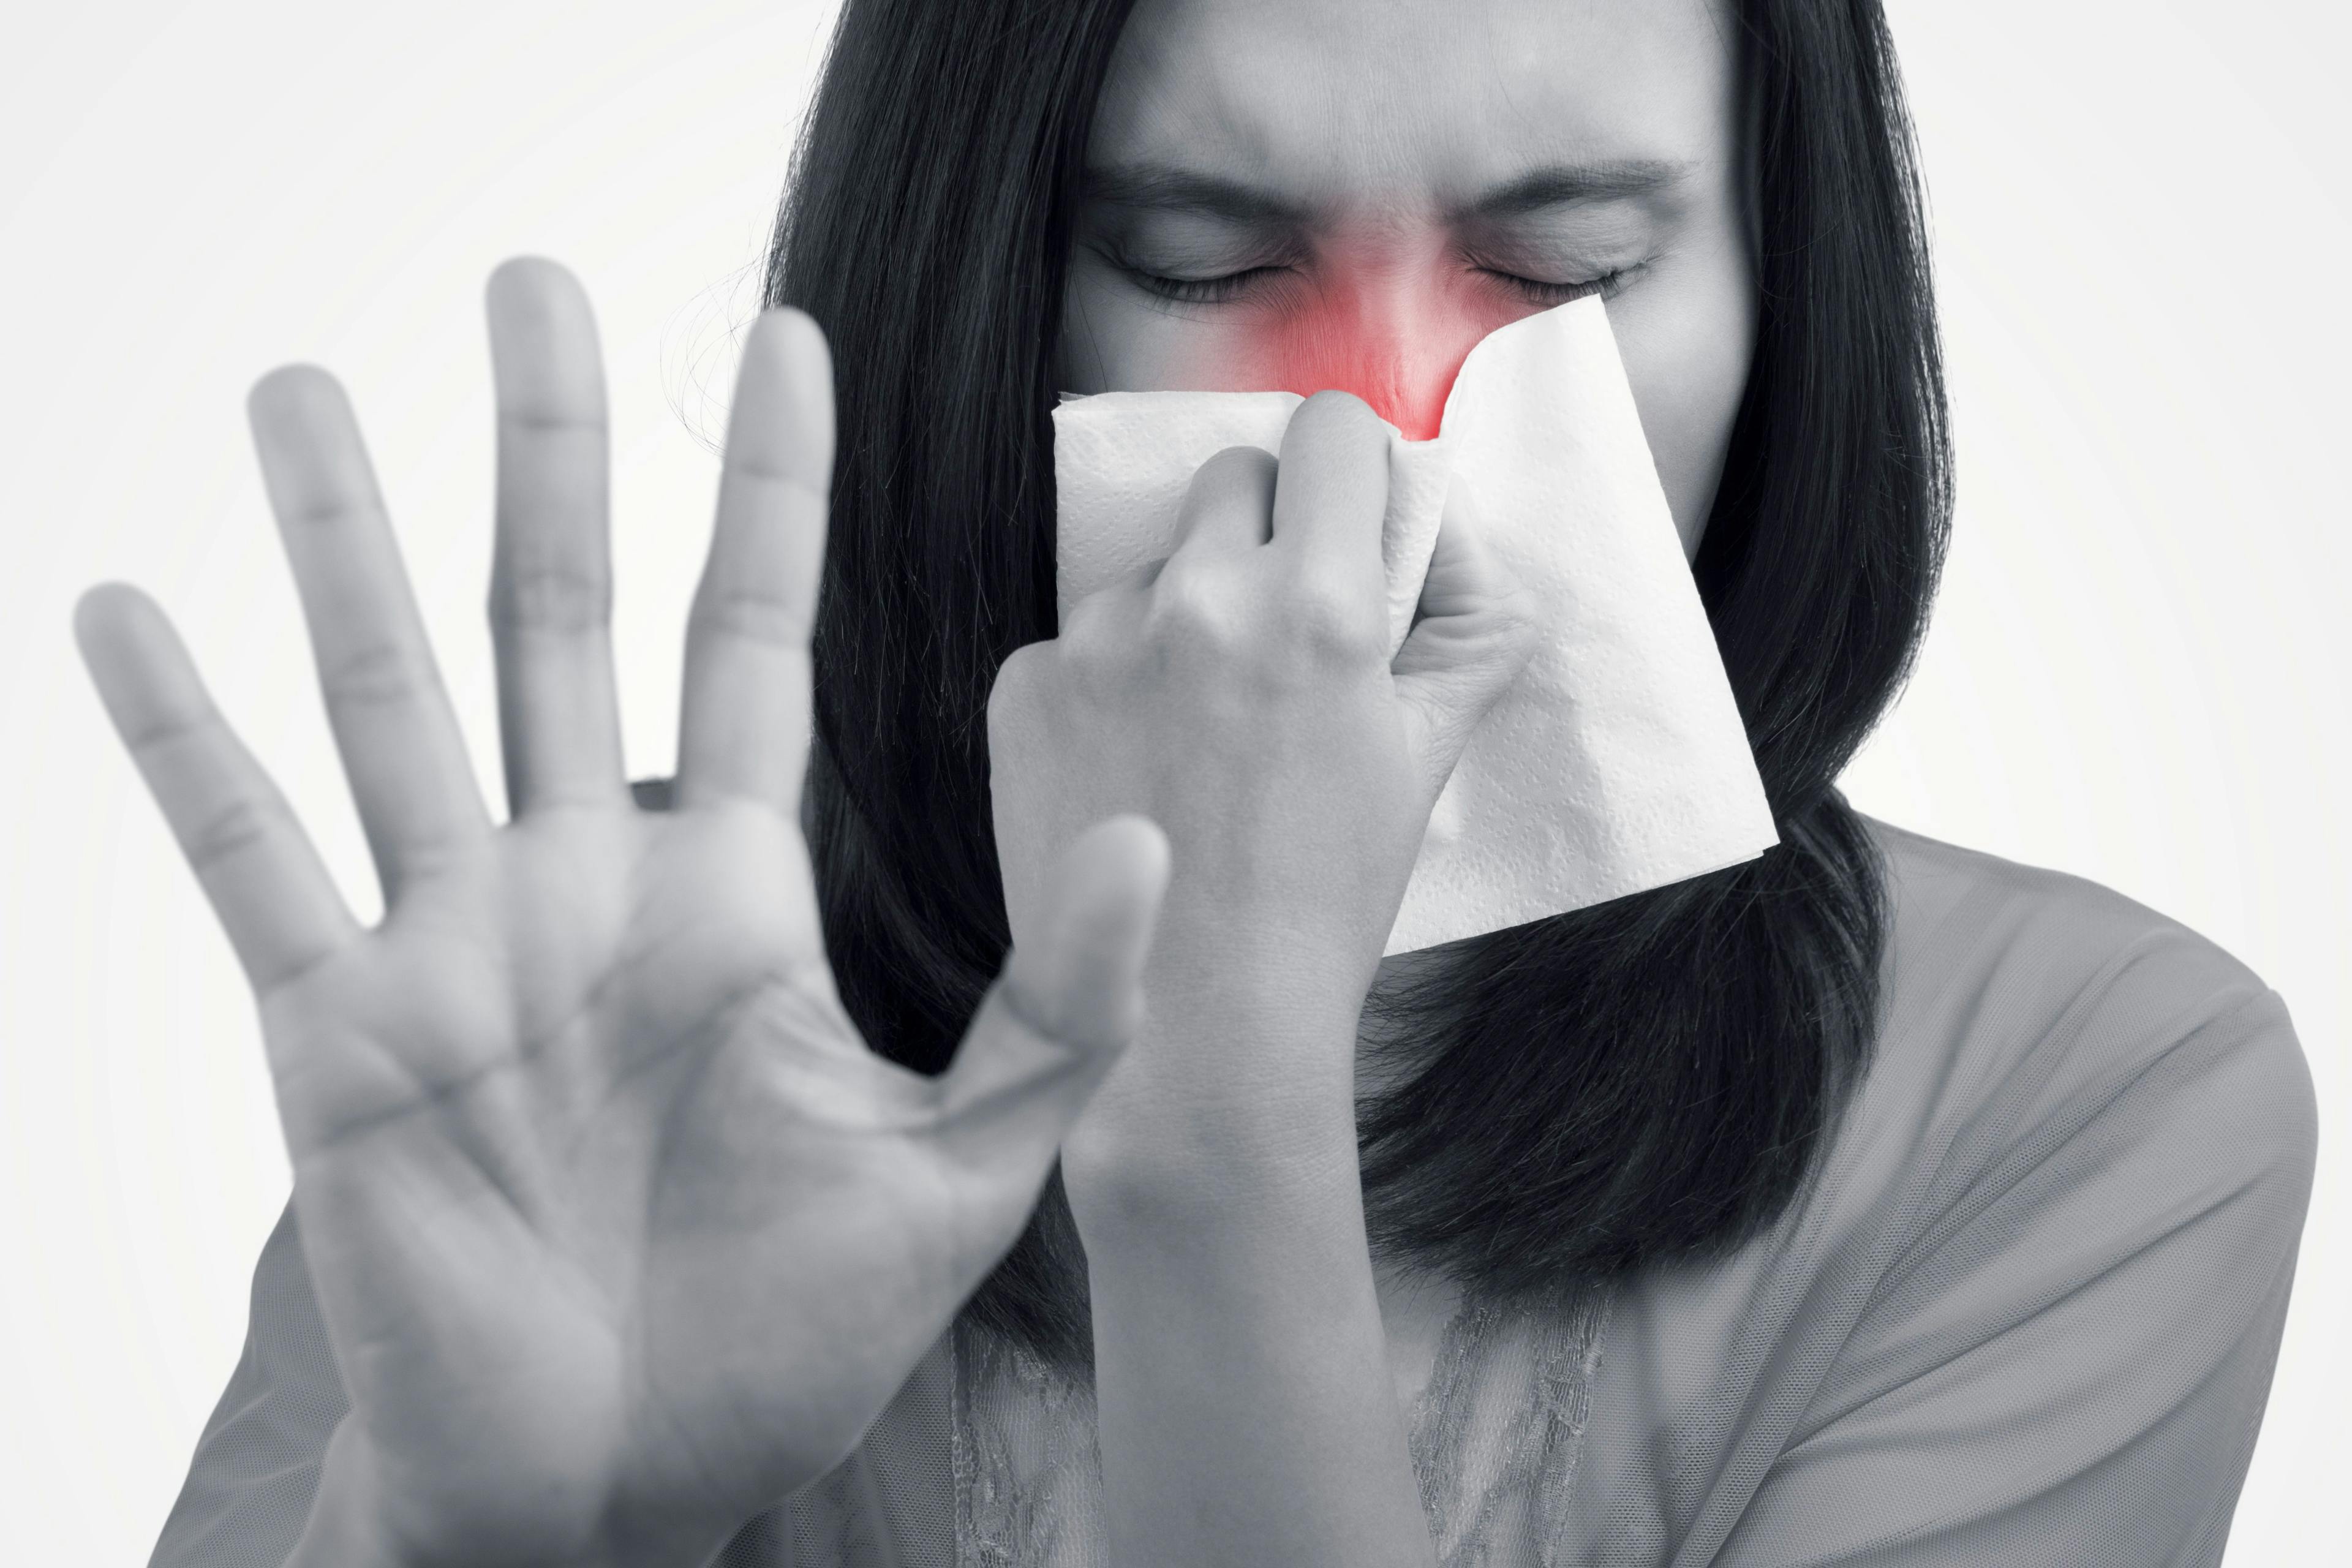 History of Allergies Potentially Associated With Increased Risk of High Blood Pressure, Heart Disease